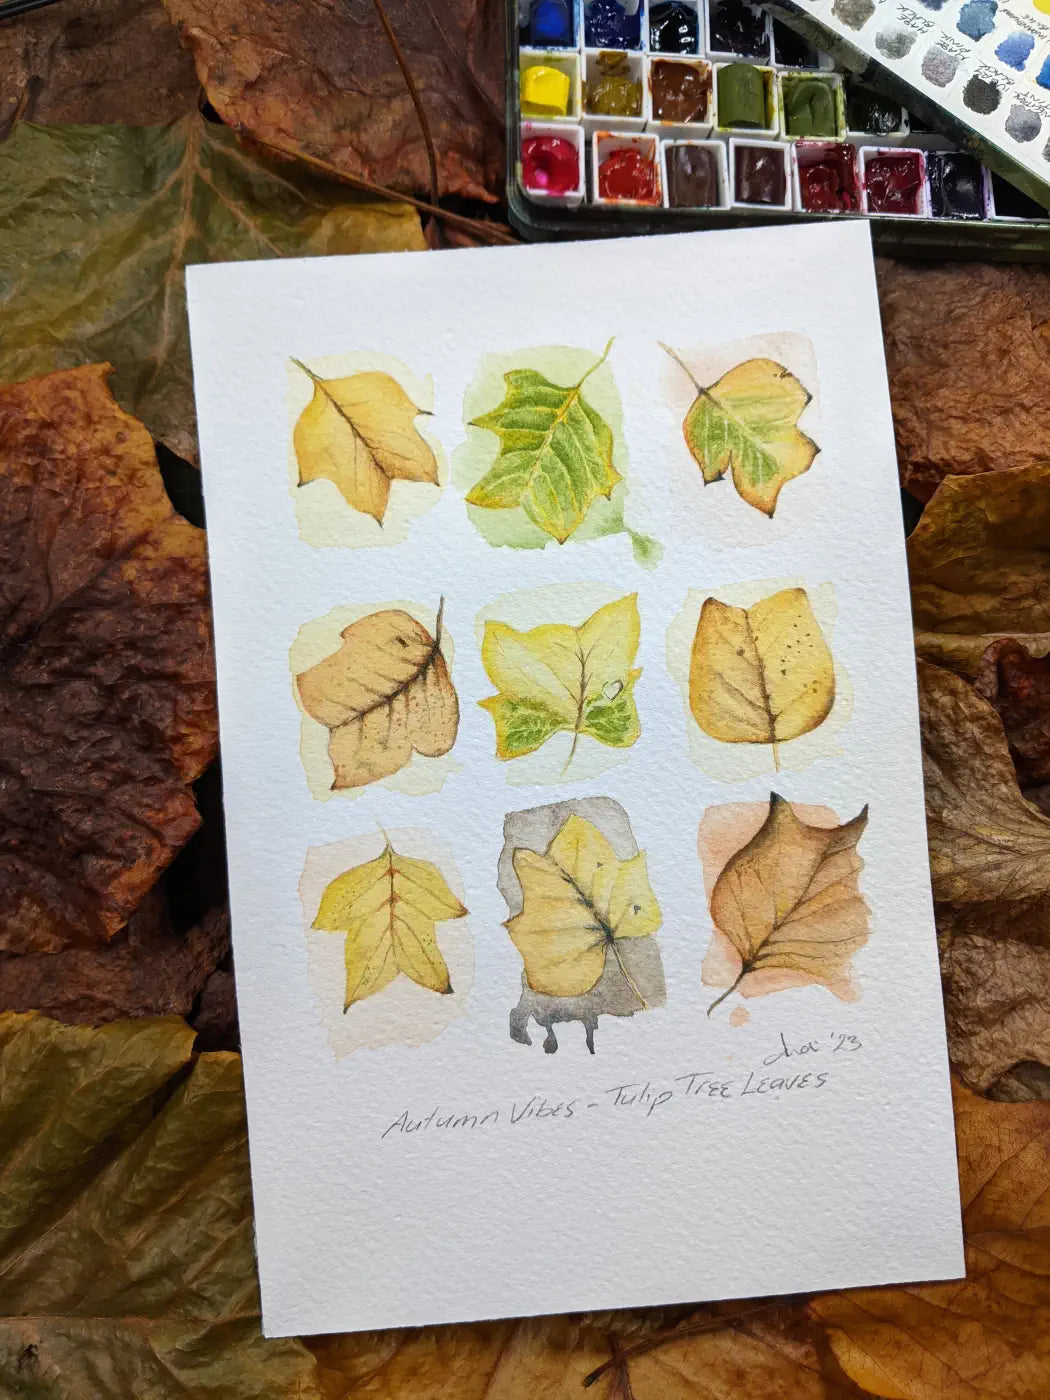 the original painting of leaves